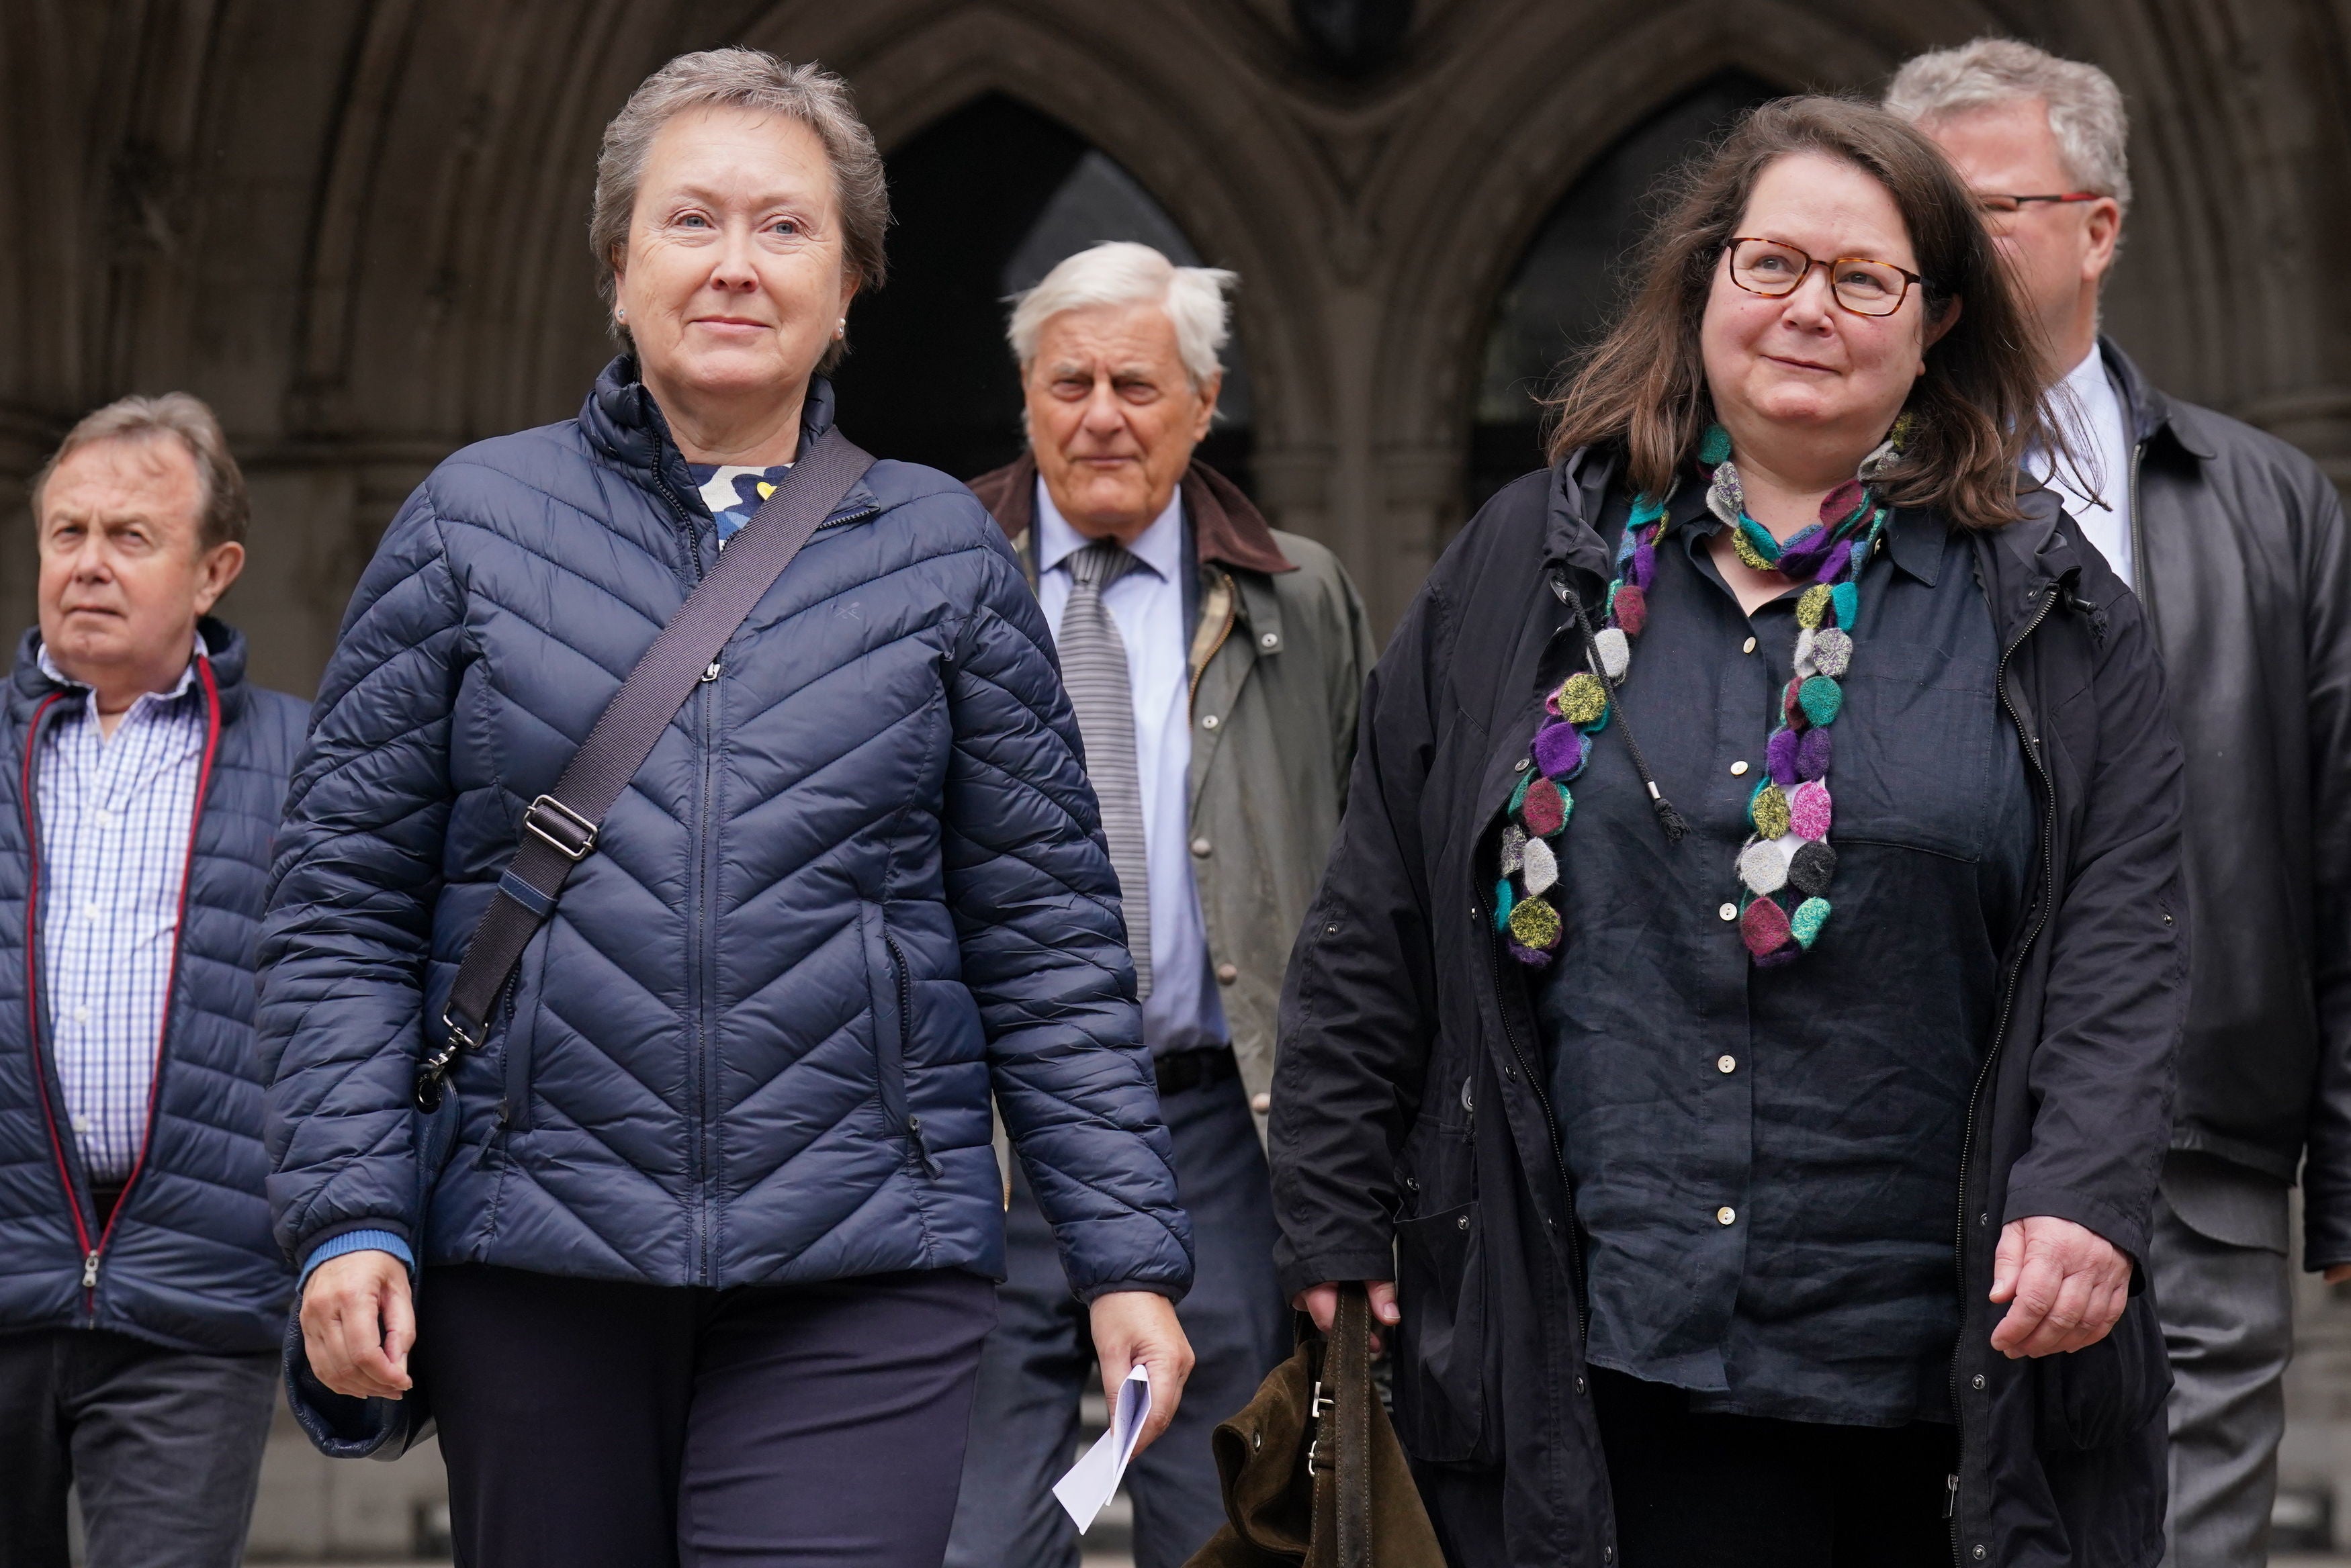 Cathy Gardner (second left) and Fay Harris (second right), whose fathers died from Covid-19, leave the Royal Courts of Justice after the ruling yesterday